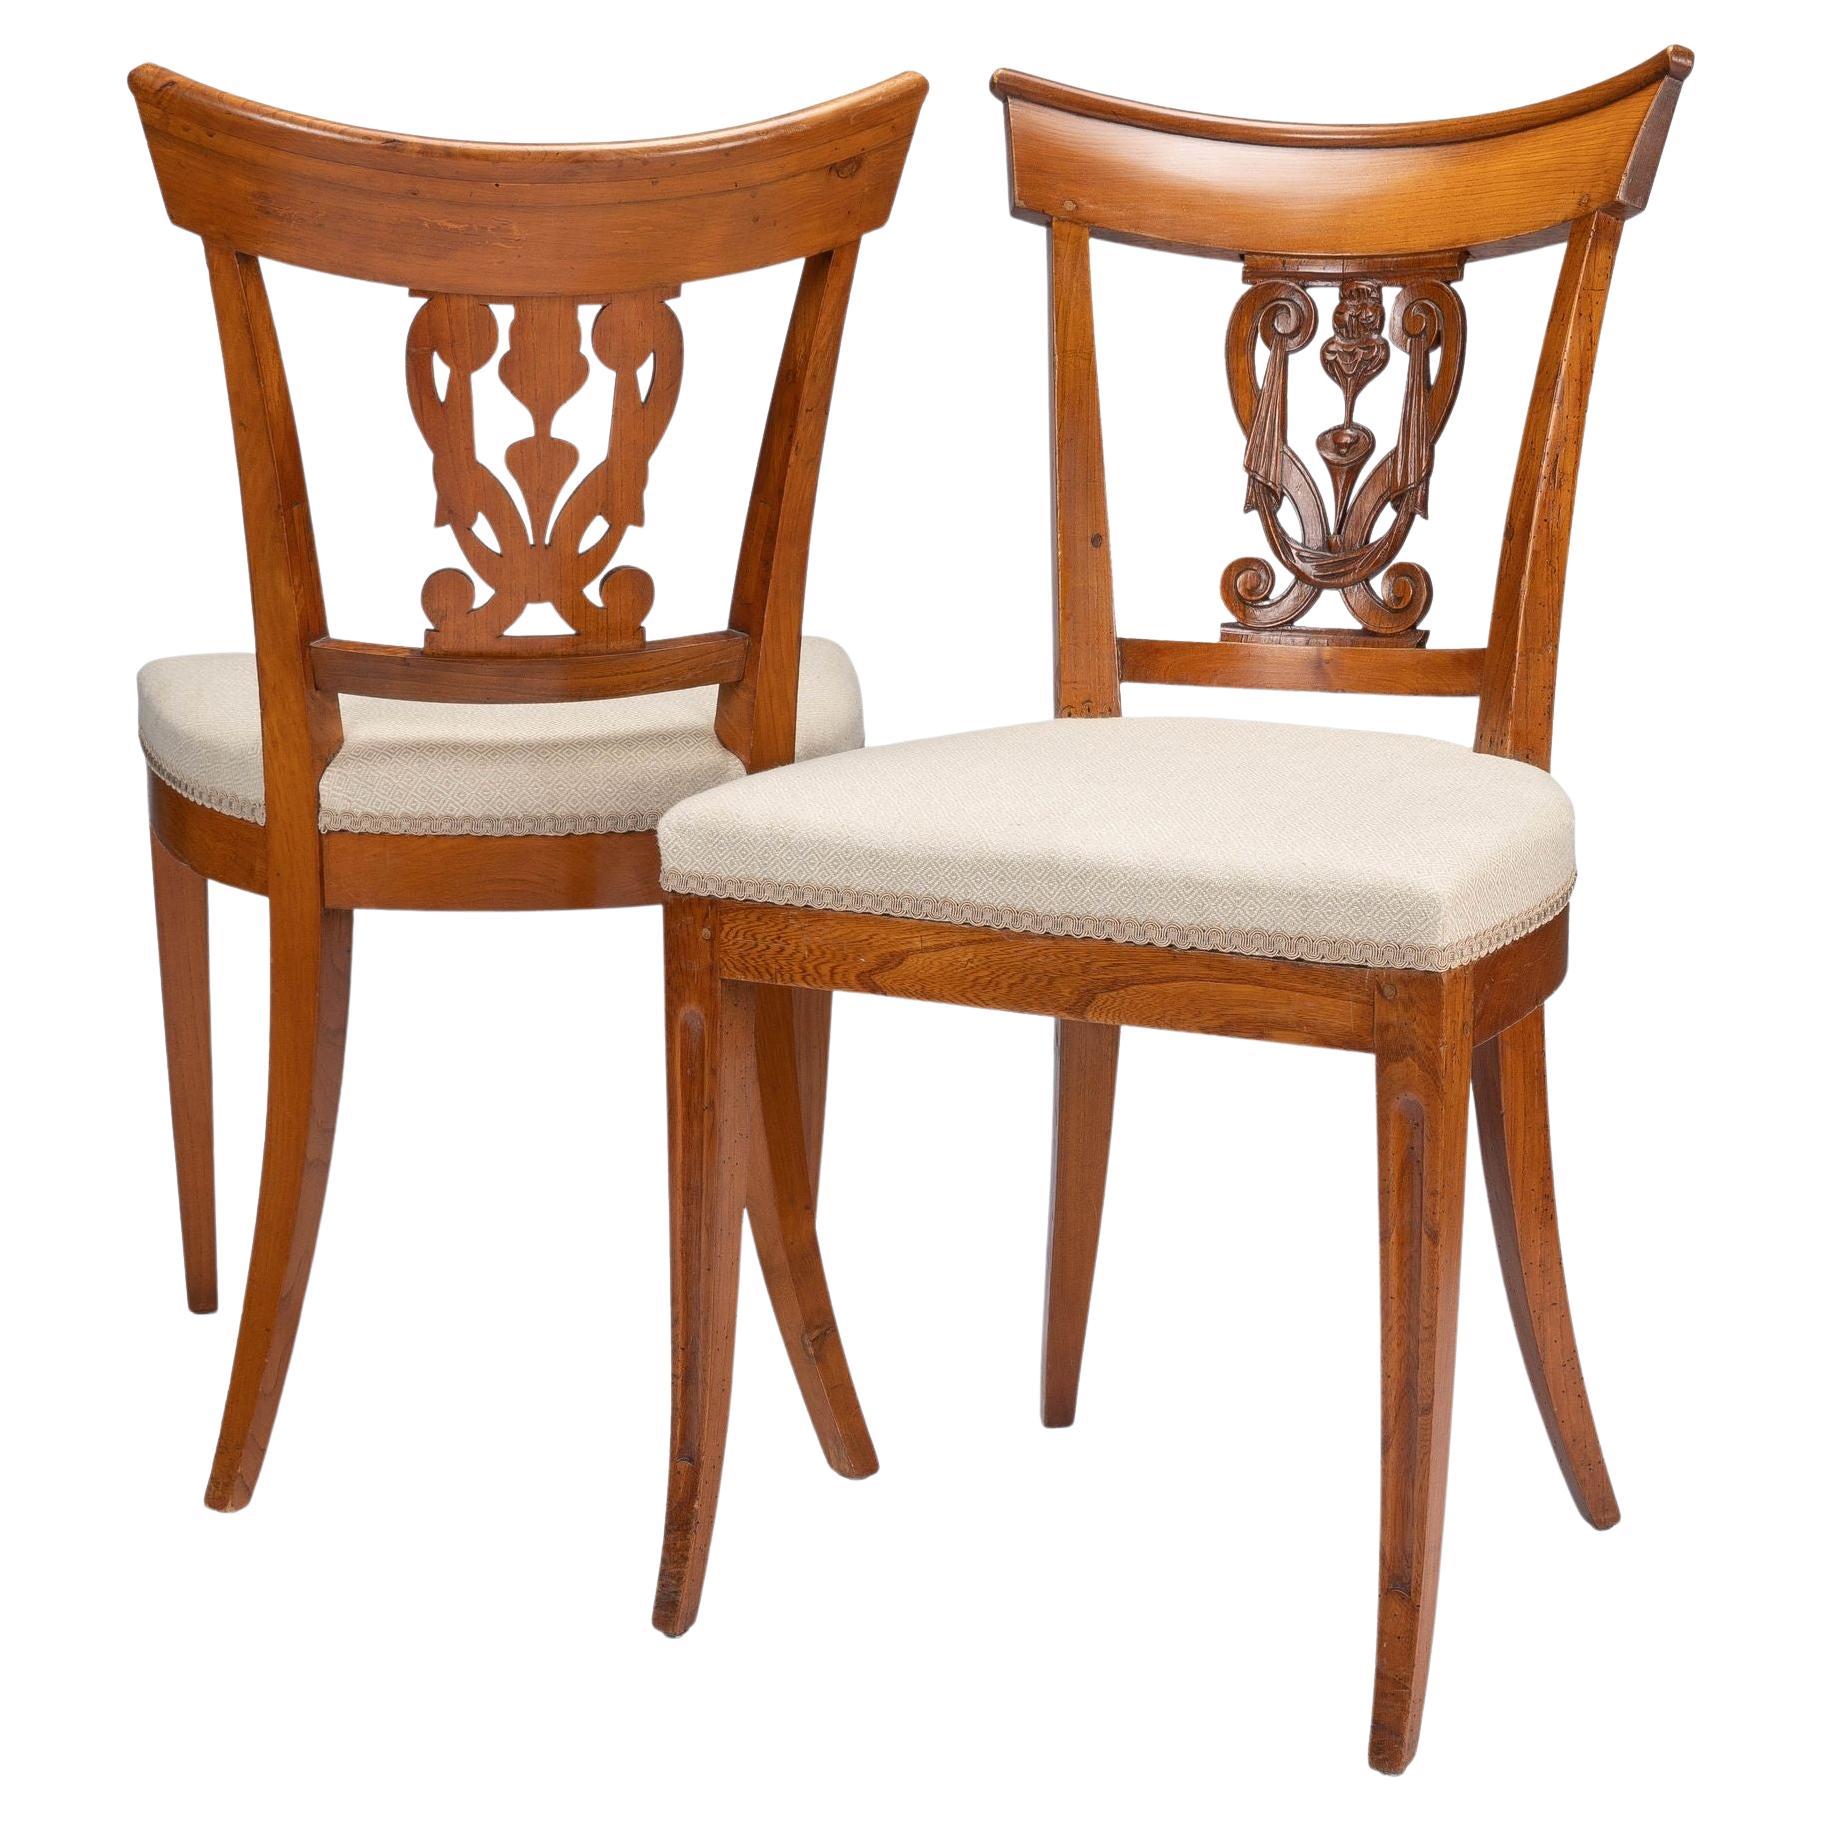 Pair of French Neoclassic Upholstered Seat Side Chairs, c. 1795-1810 For Sale